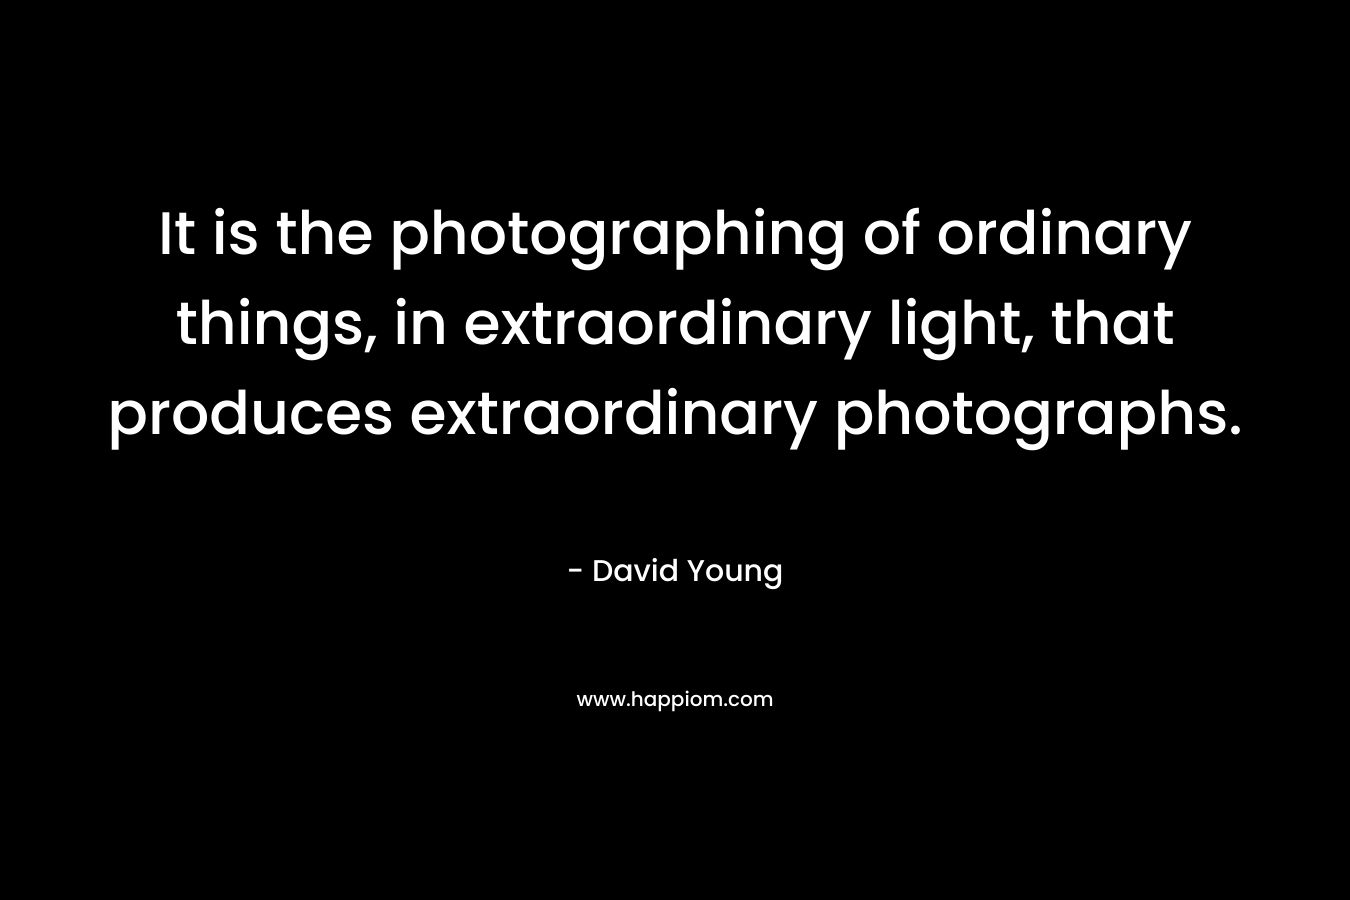 It is the photographing of ordinary things, in extraordinary light, that produces extraordinary photographs.